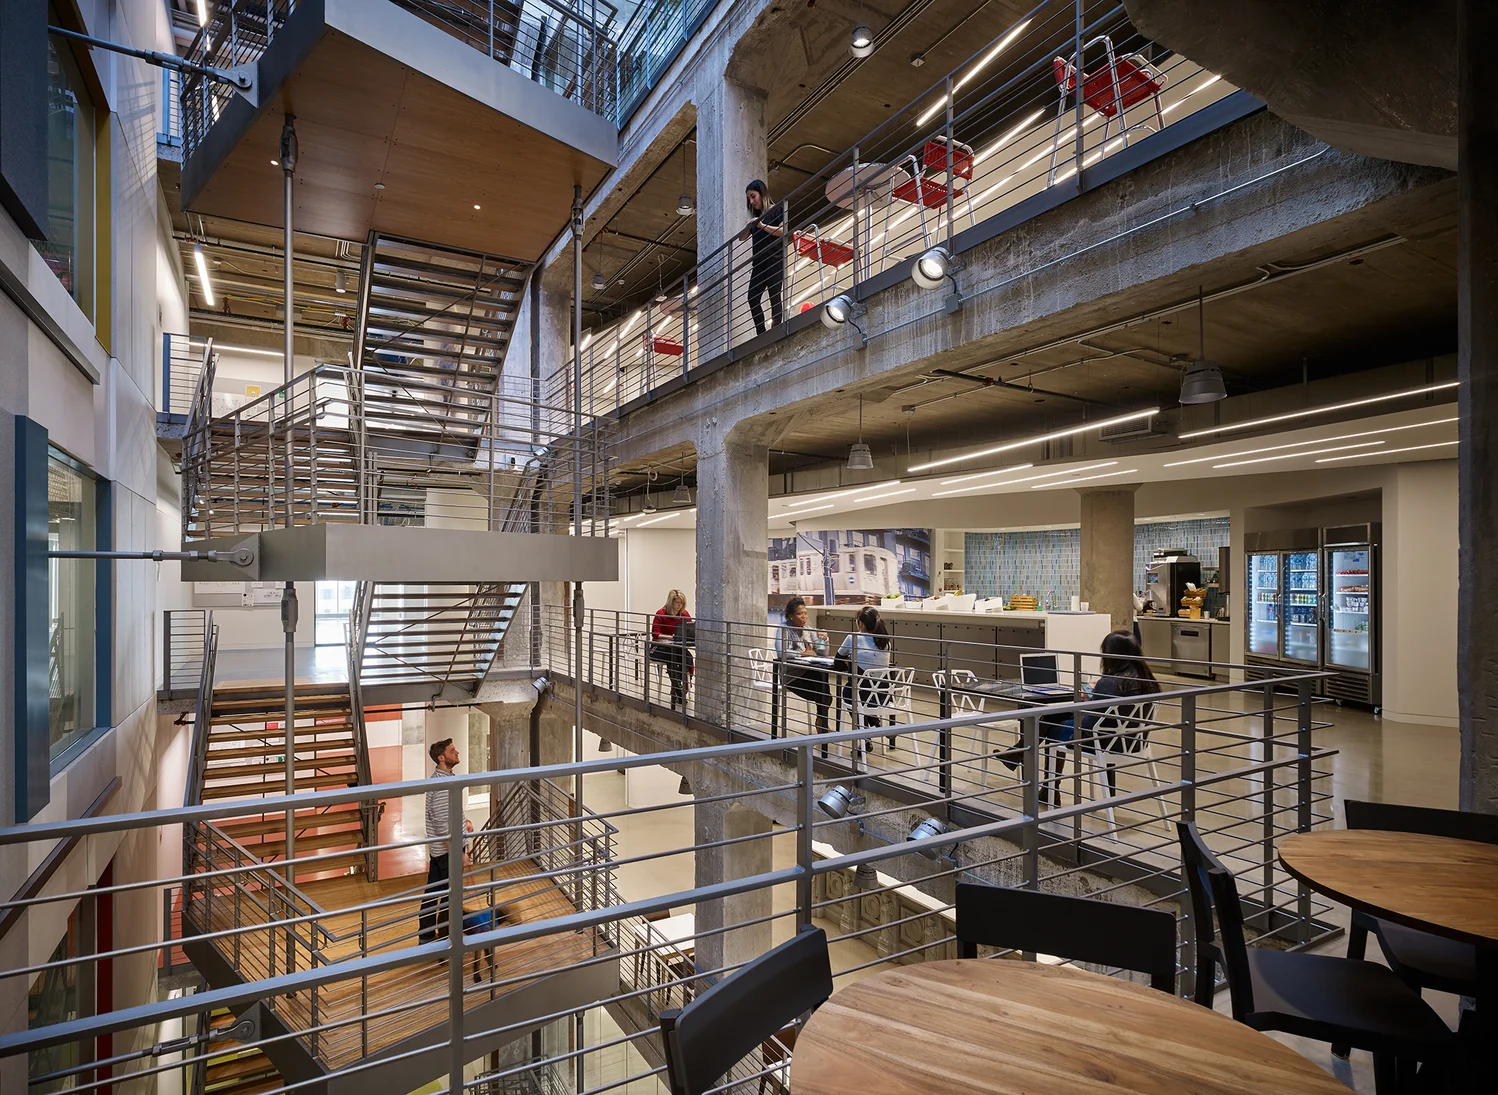 A large staircase leads to three separate floors. A person on the bottom floor looks up towards a kitchen on the next floor, where three Googlers are sitting at tables. A person on the top floor looks down from the balcony.